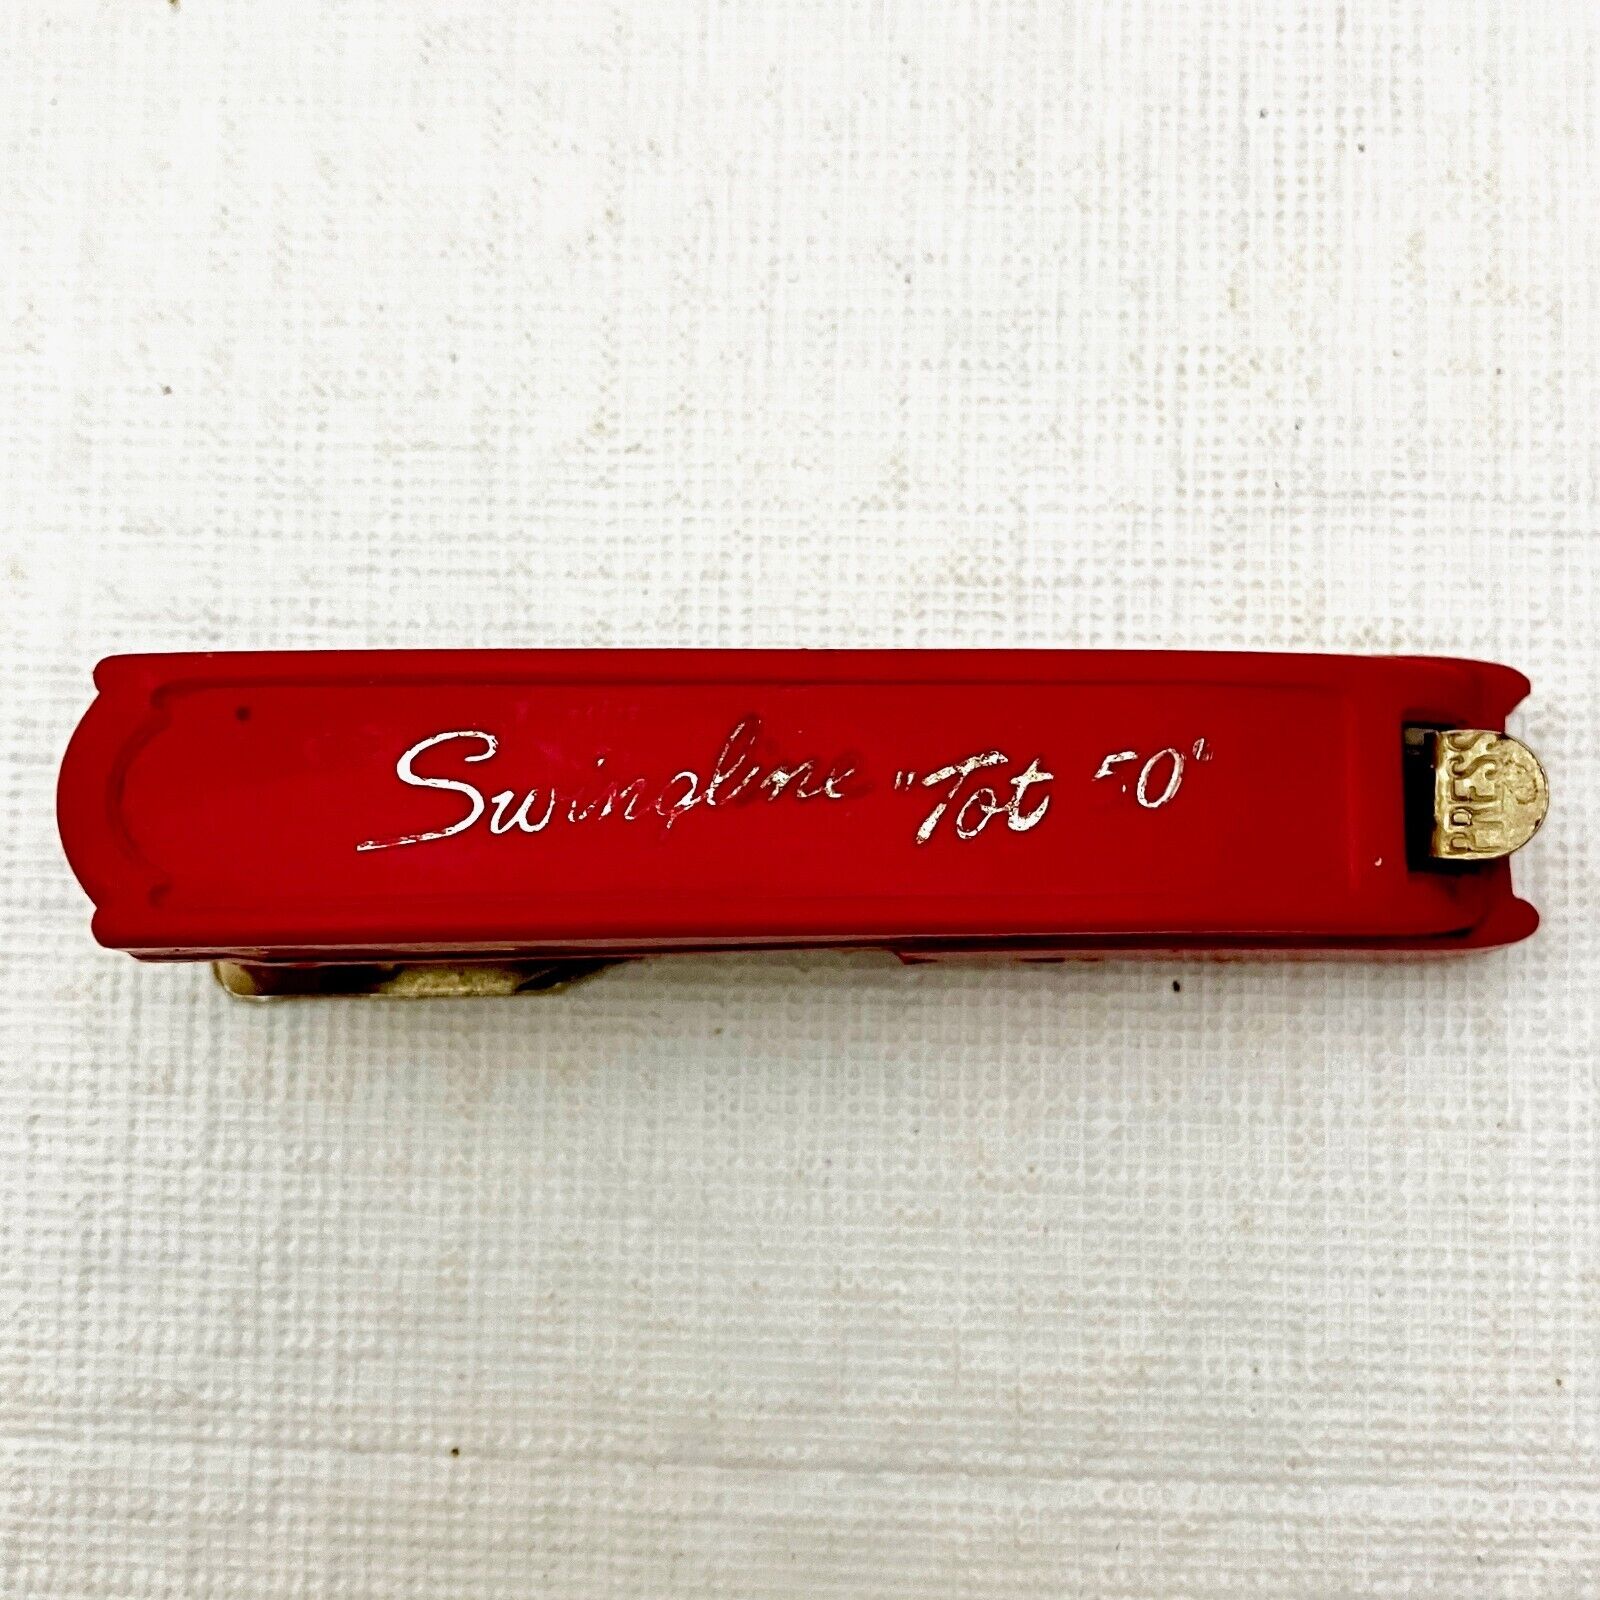 Vintage Swingline Tot 50 Mini Red Stapler Made in USA  TESTED